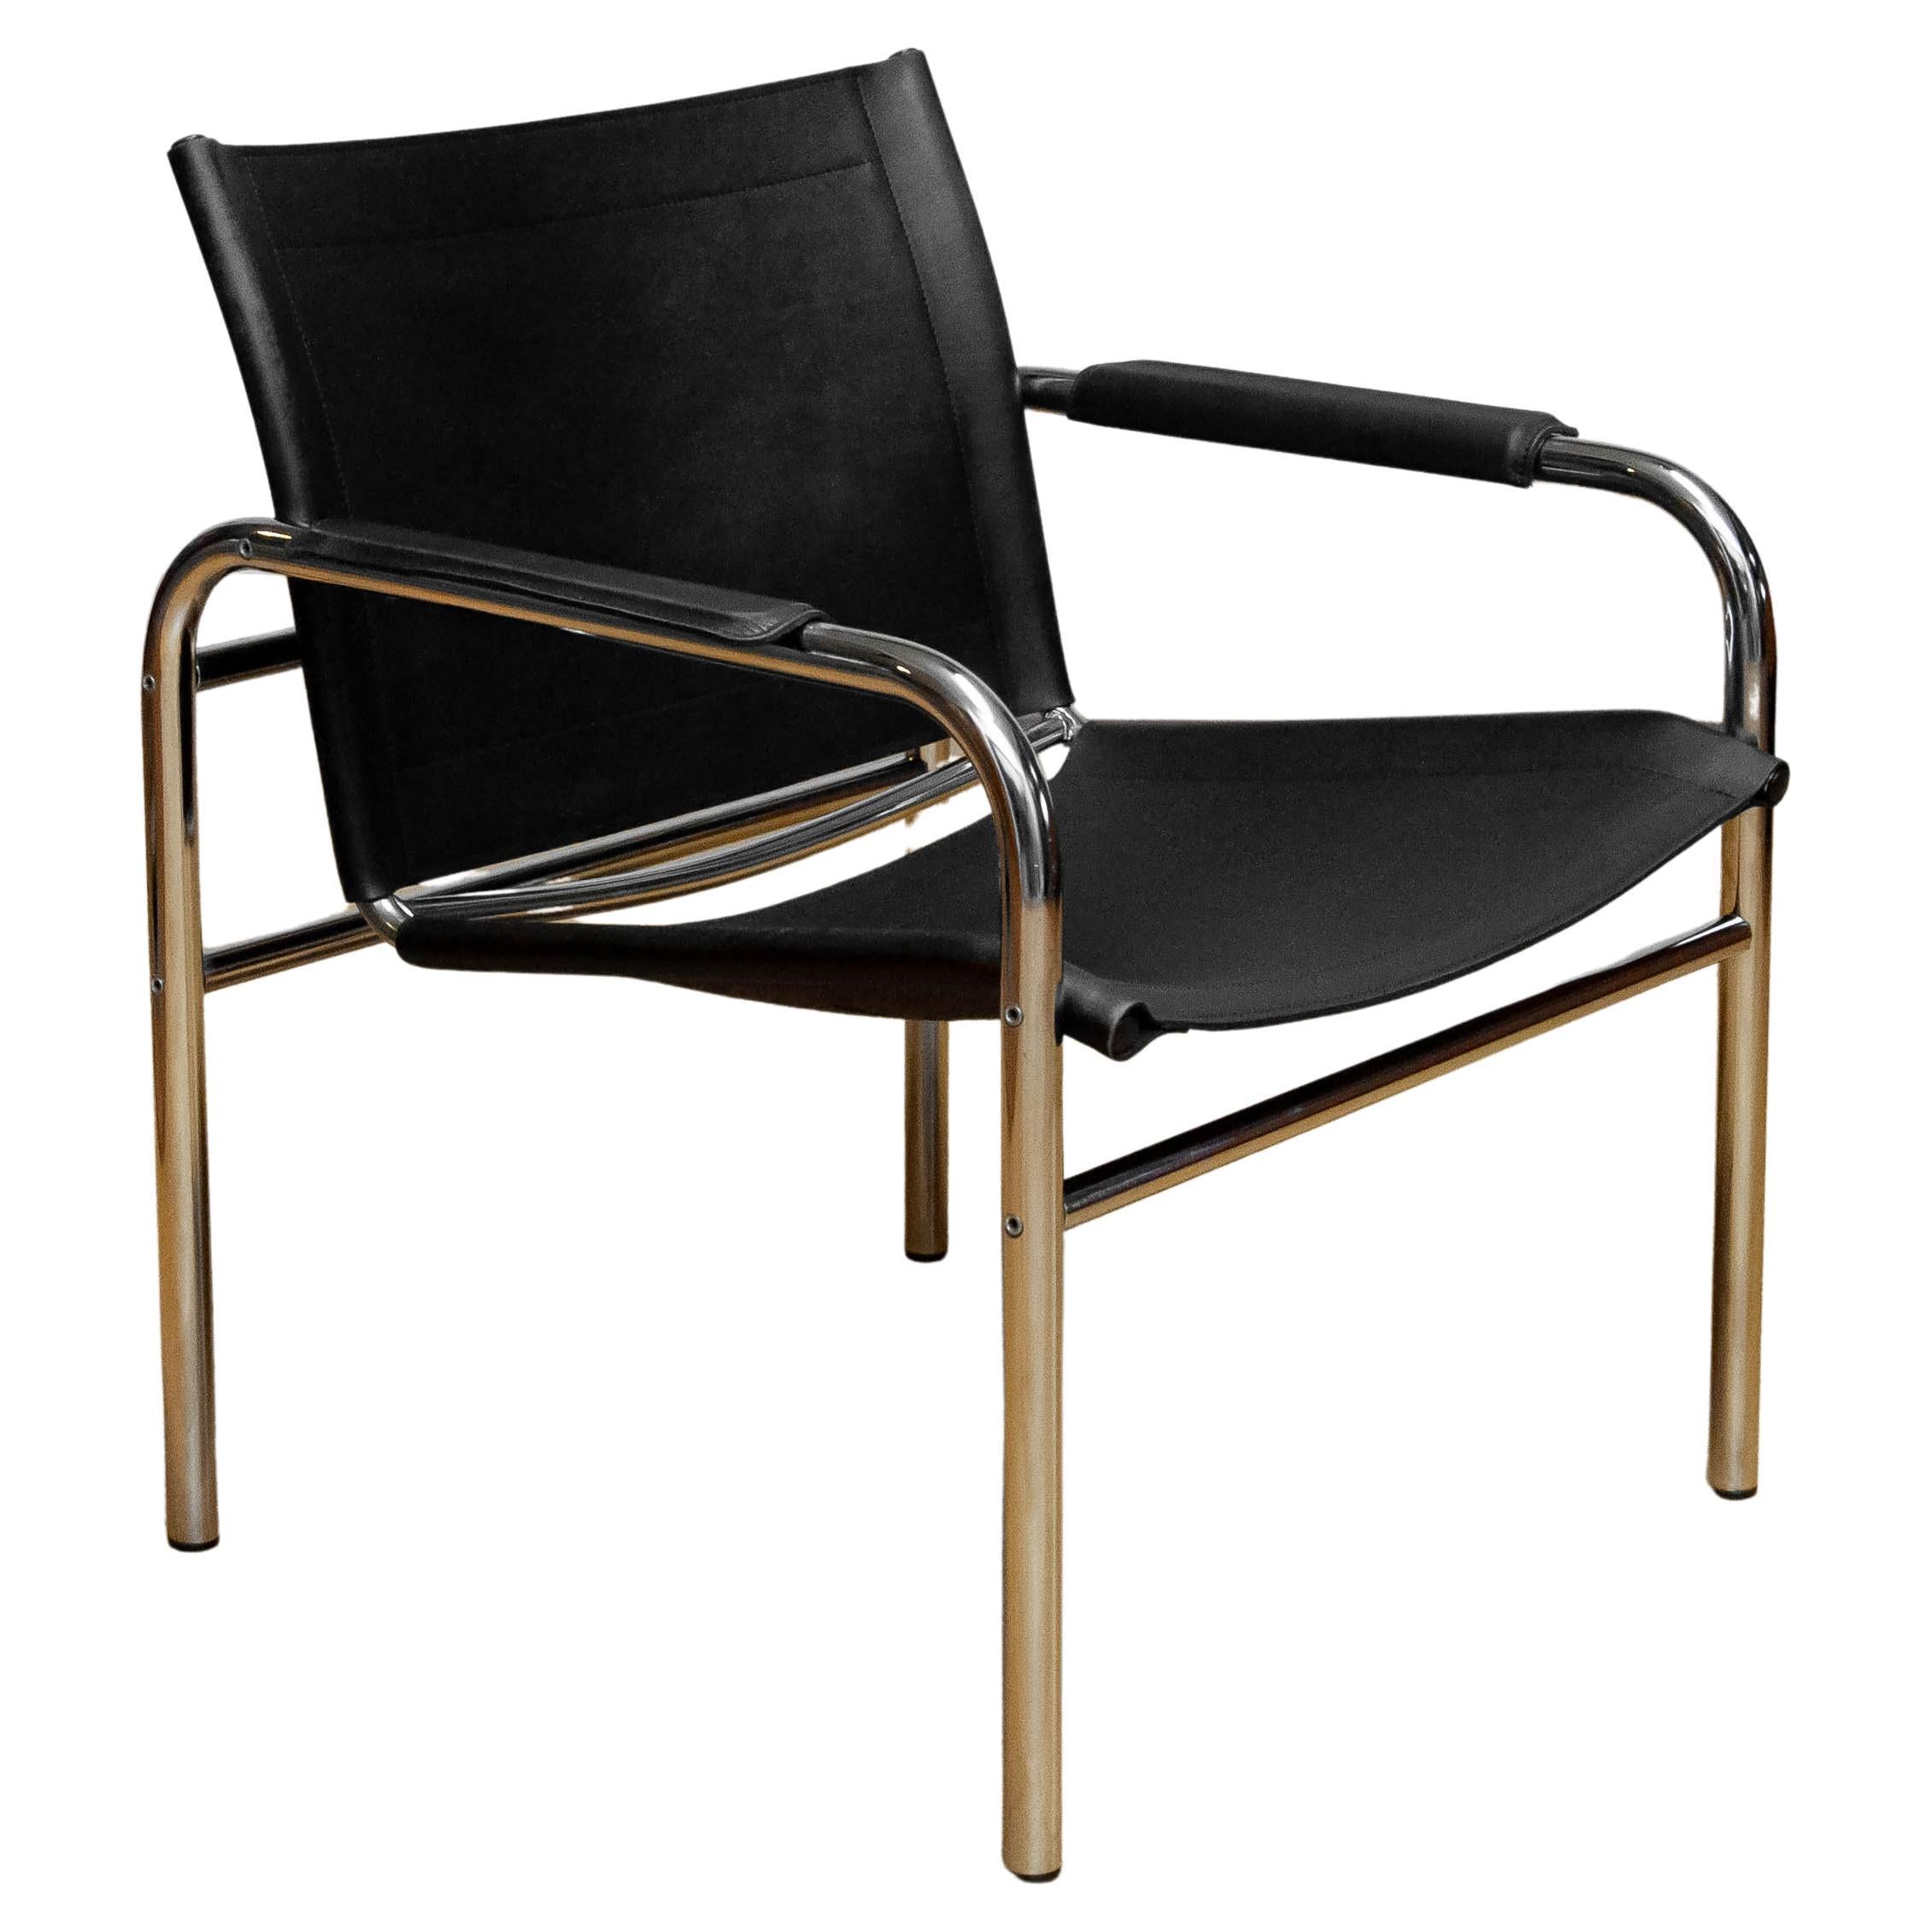 1970s Tubular Armchair Designed By Tord Bjorklund Upholstered With Black Leather For Sale